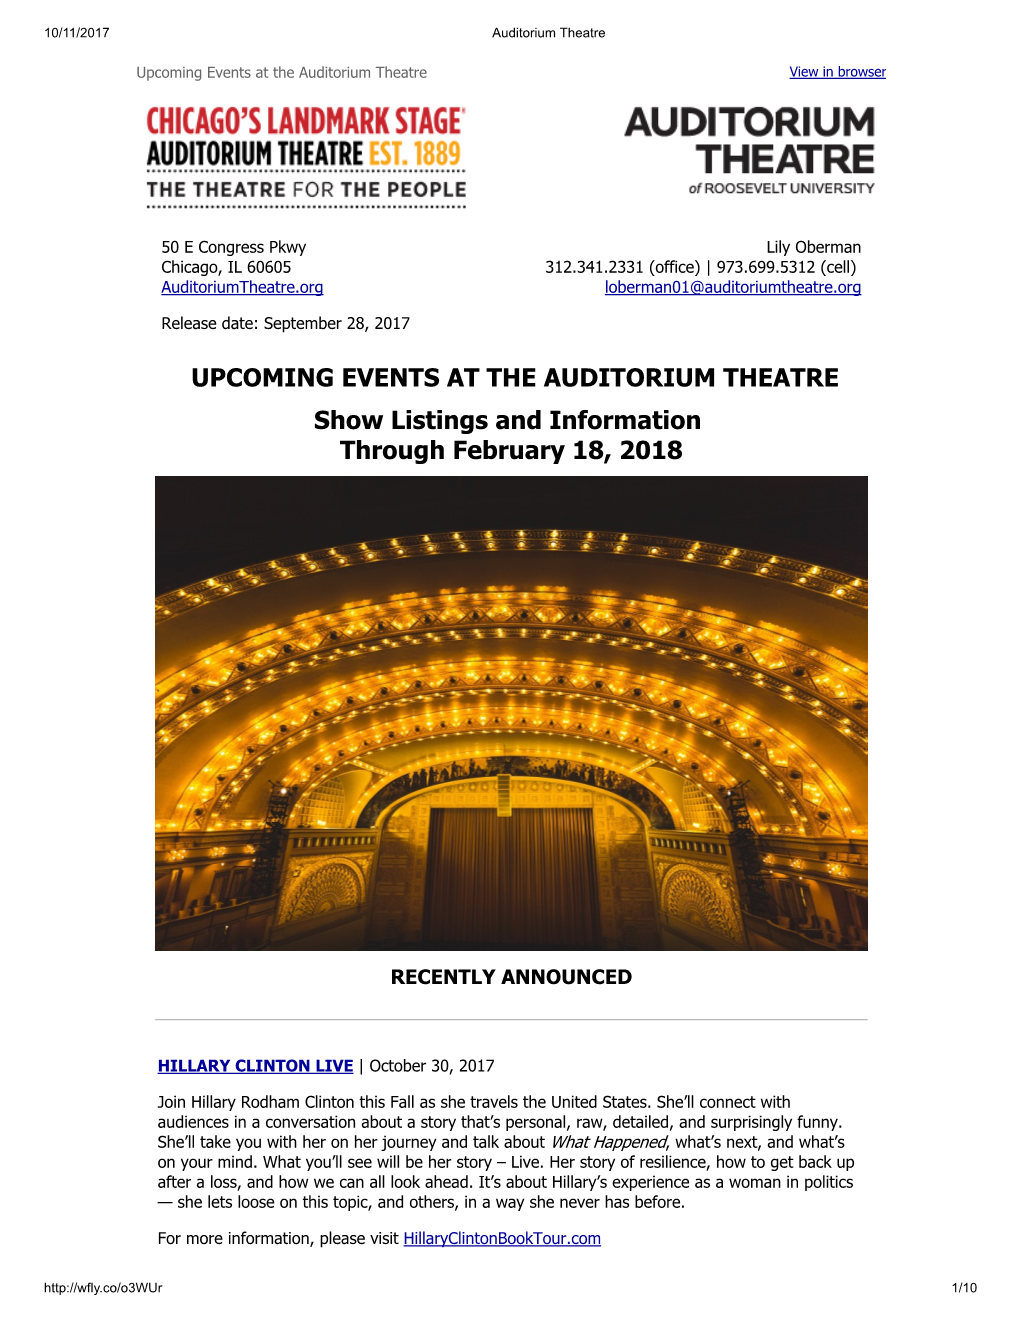 UPCOMING EVENTS at the AUDITORIUM THEATRE Show Listings and Information Through February 18, 2018